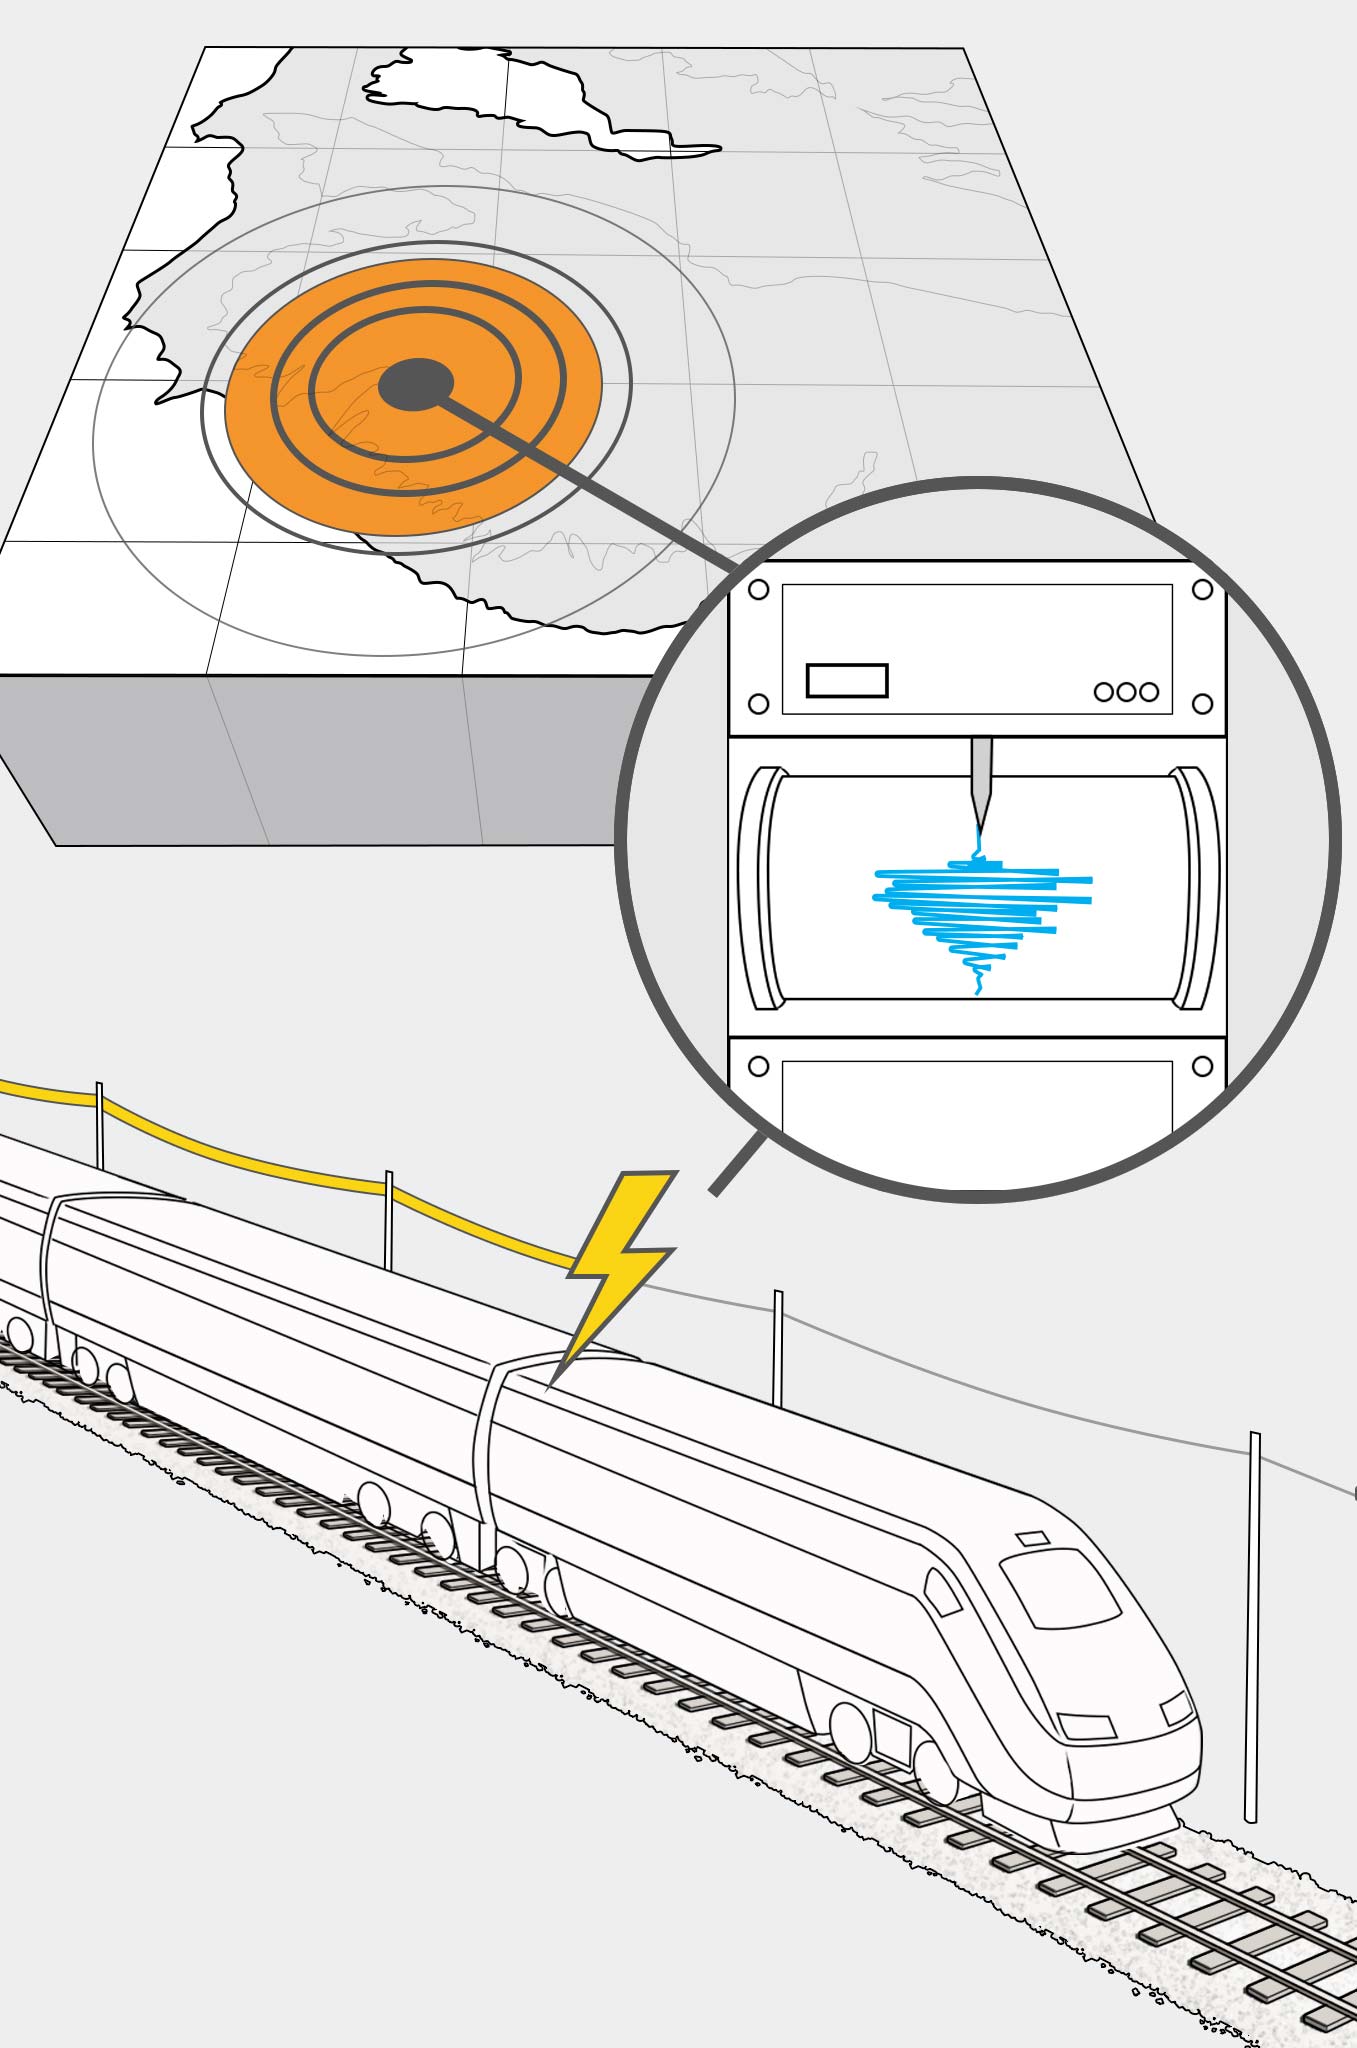 Illustration with a high-speed train crossing diagonally through the scene, a satellite, radar, and tower are communicating with the train; vehicles are parked at gates which are blocking the track as the train passes; an operator is monitoring conditions from computers.